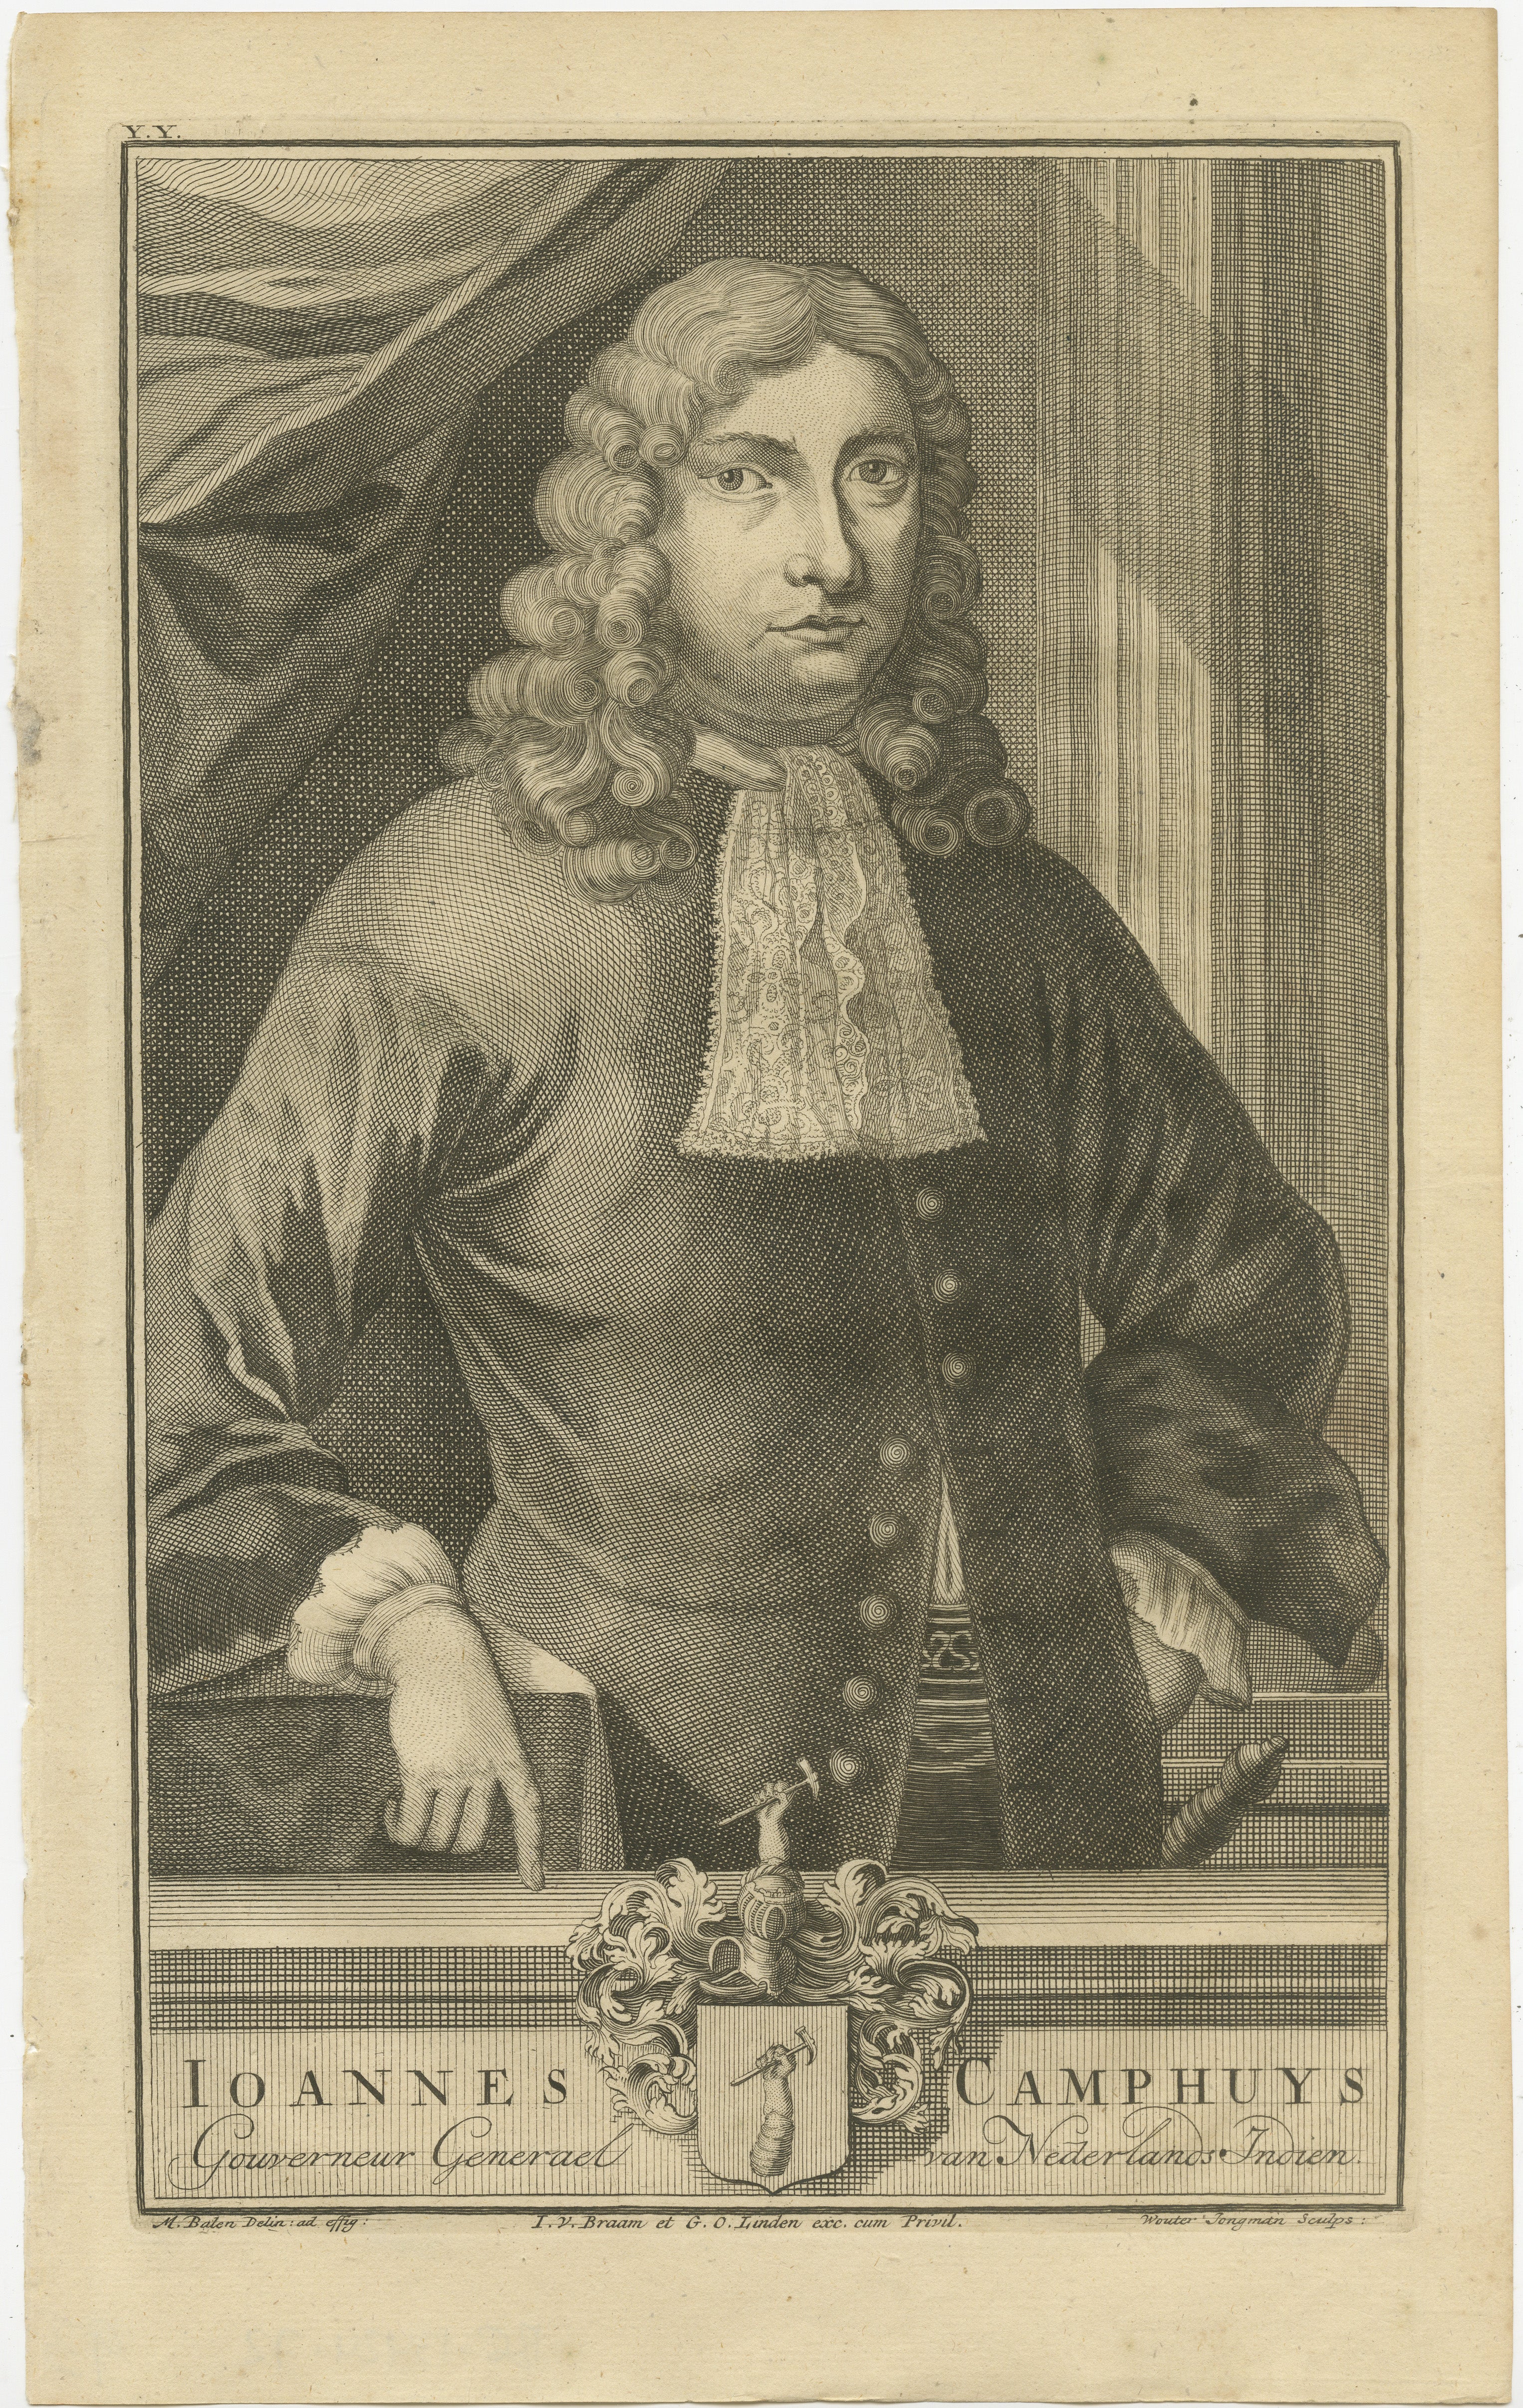 The engraving from 1724 of Ioannes Camphuys is artistic representation of his legacy long after his tenure as the Governor-General of the Dutch East India Company (VOC) in the Dutch East Indies, which was from 1684 to 1691.

The artwork features